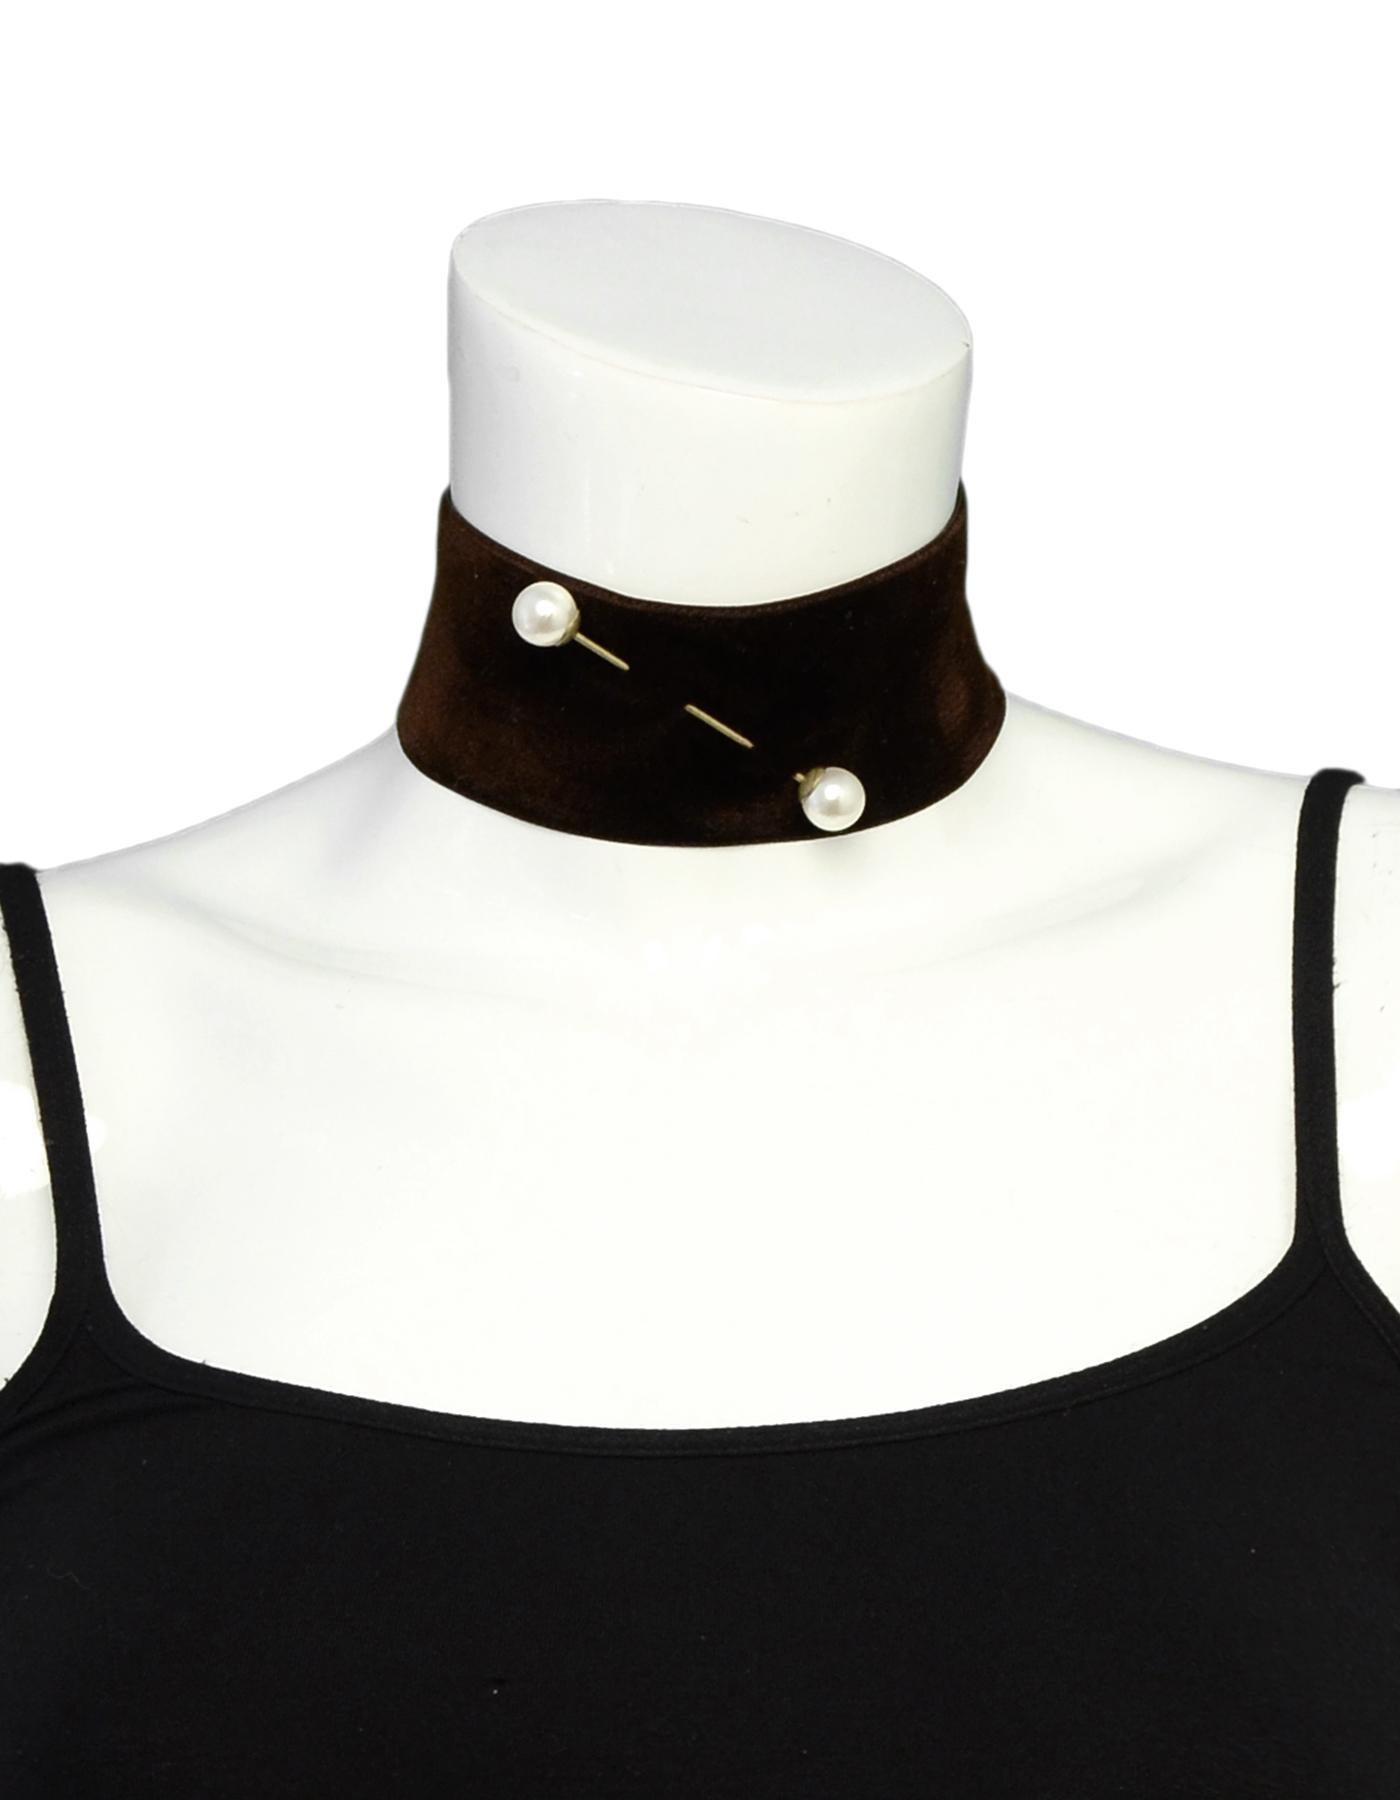 Dries Van Noten Brown Velvet Choker w/ Pearl
Year of Production: 2016
Color: Brown
Materials: Velvet, faux pearl
Hallmarks: Dries Van Noten (on back)
Closure/Opening: Two back snap closures
Overall Condition: Excellent pre-owned condition
Estimated